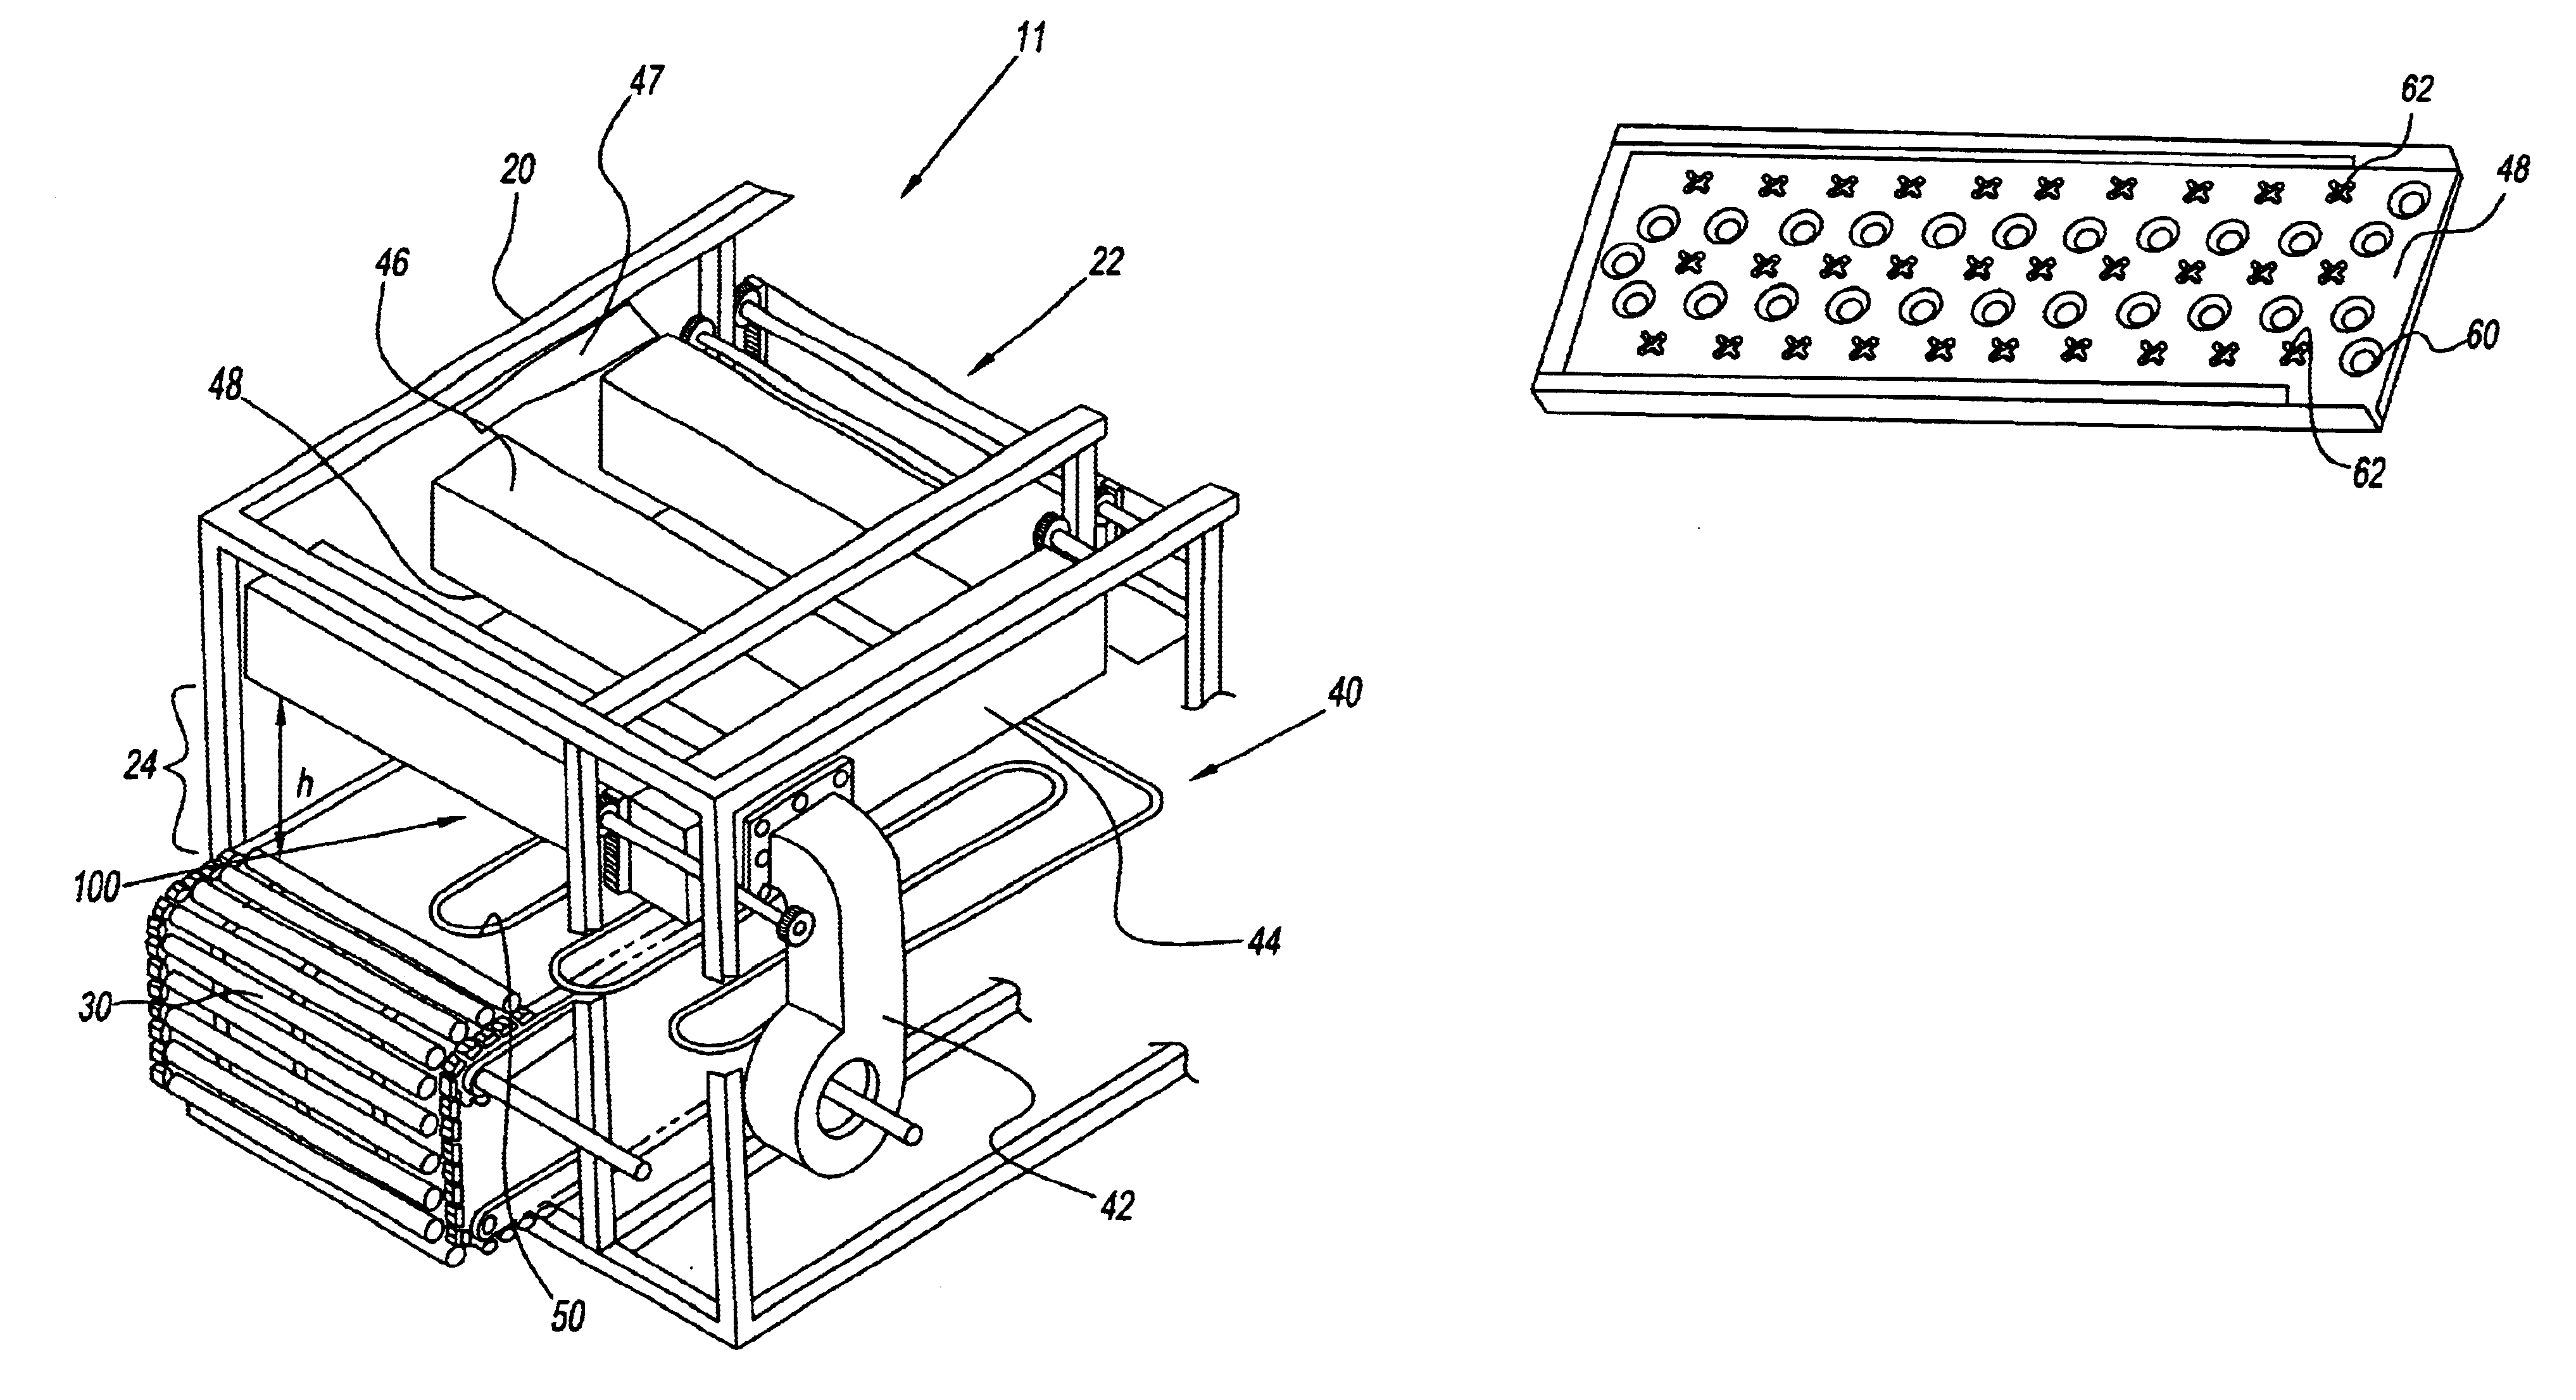 High speed cooking oven having an air impingement heater with an improved orifice configuration